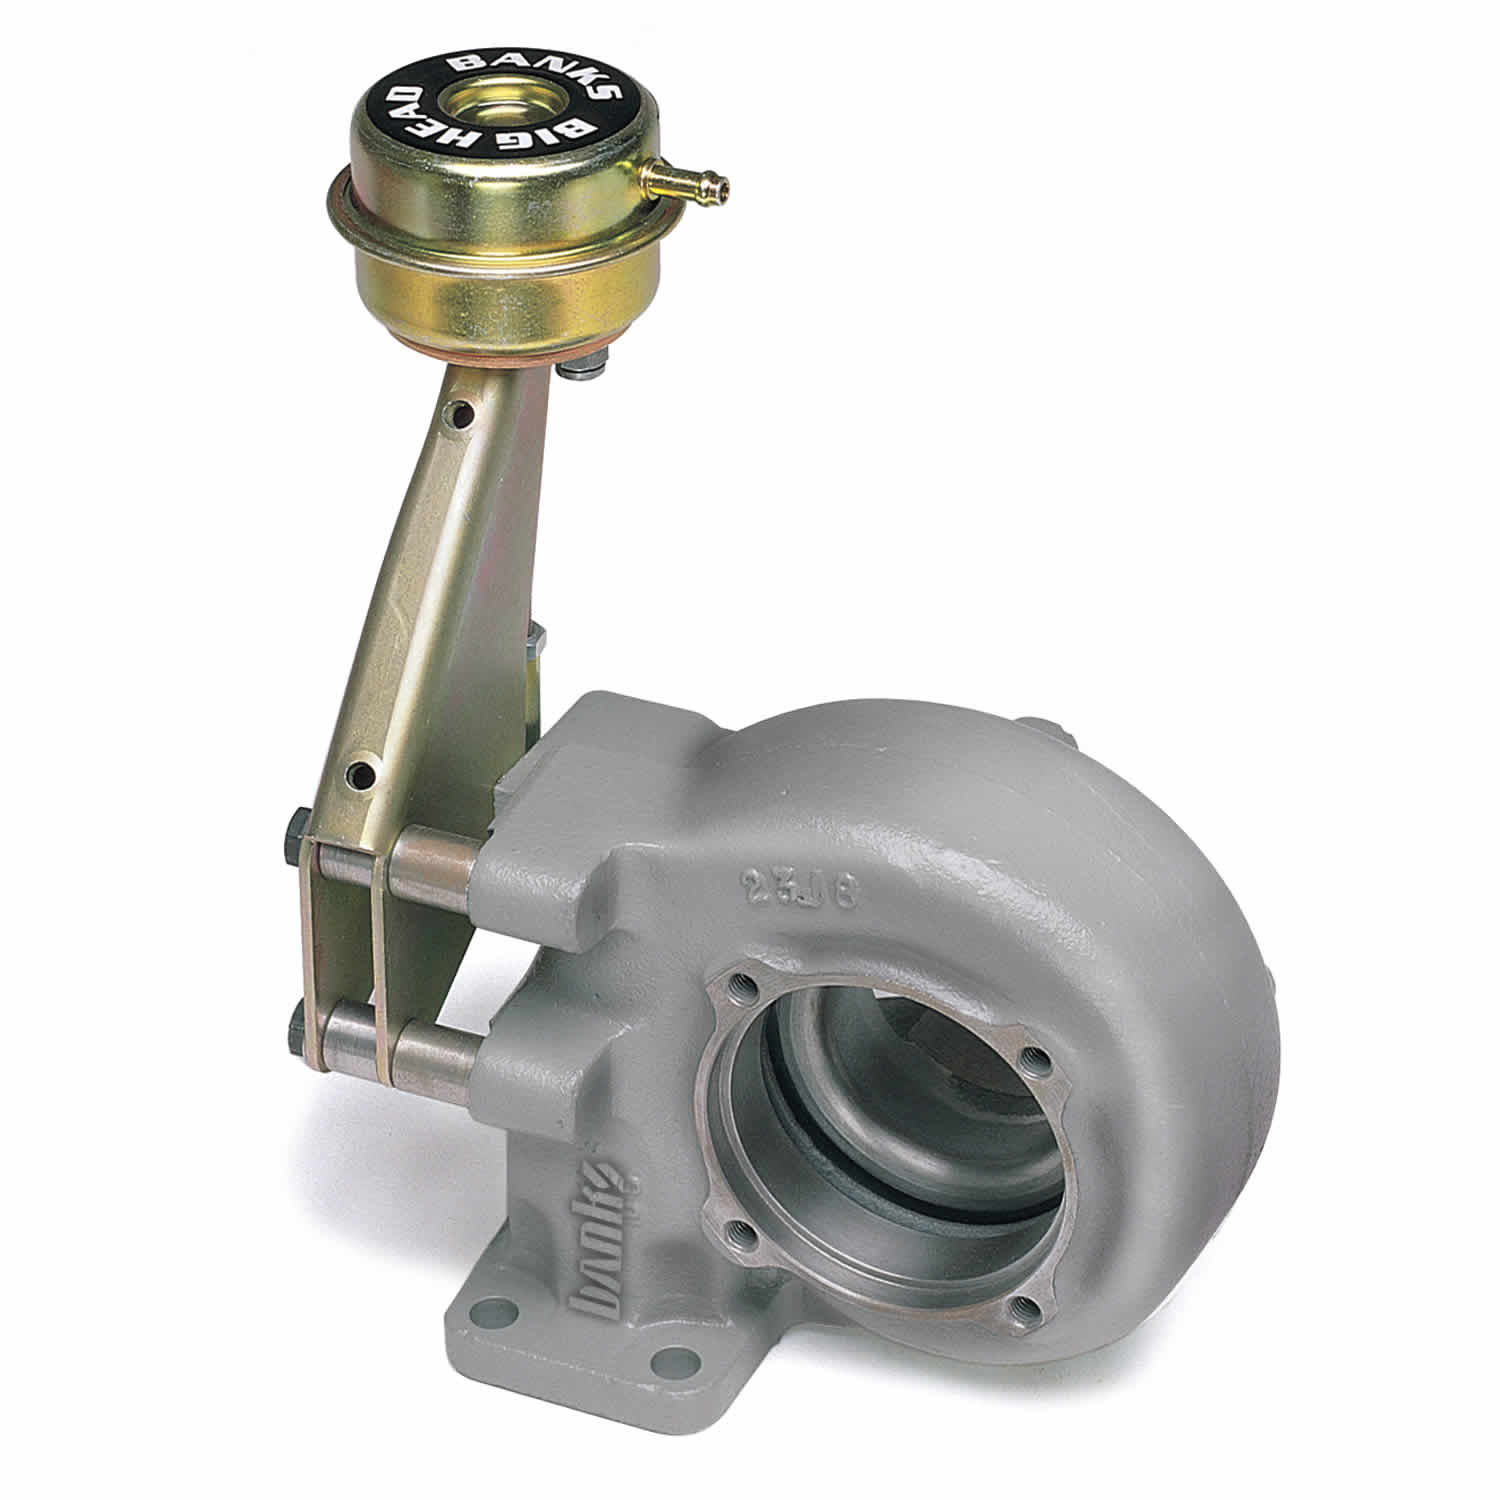 Quick-Turbo Housing Assembly 1994-2002 Dodge 5.9L for Cummins